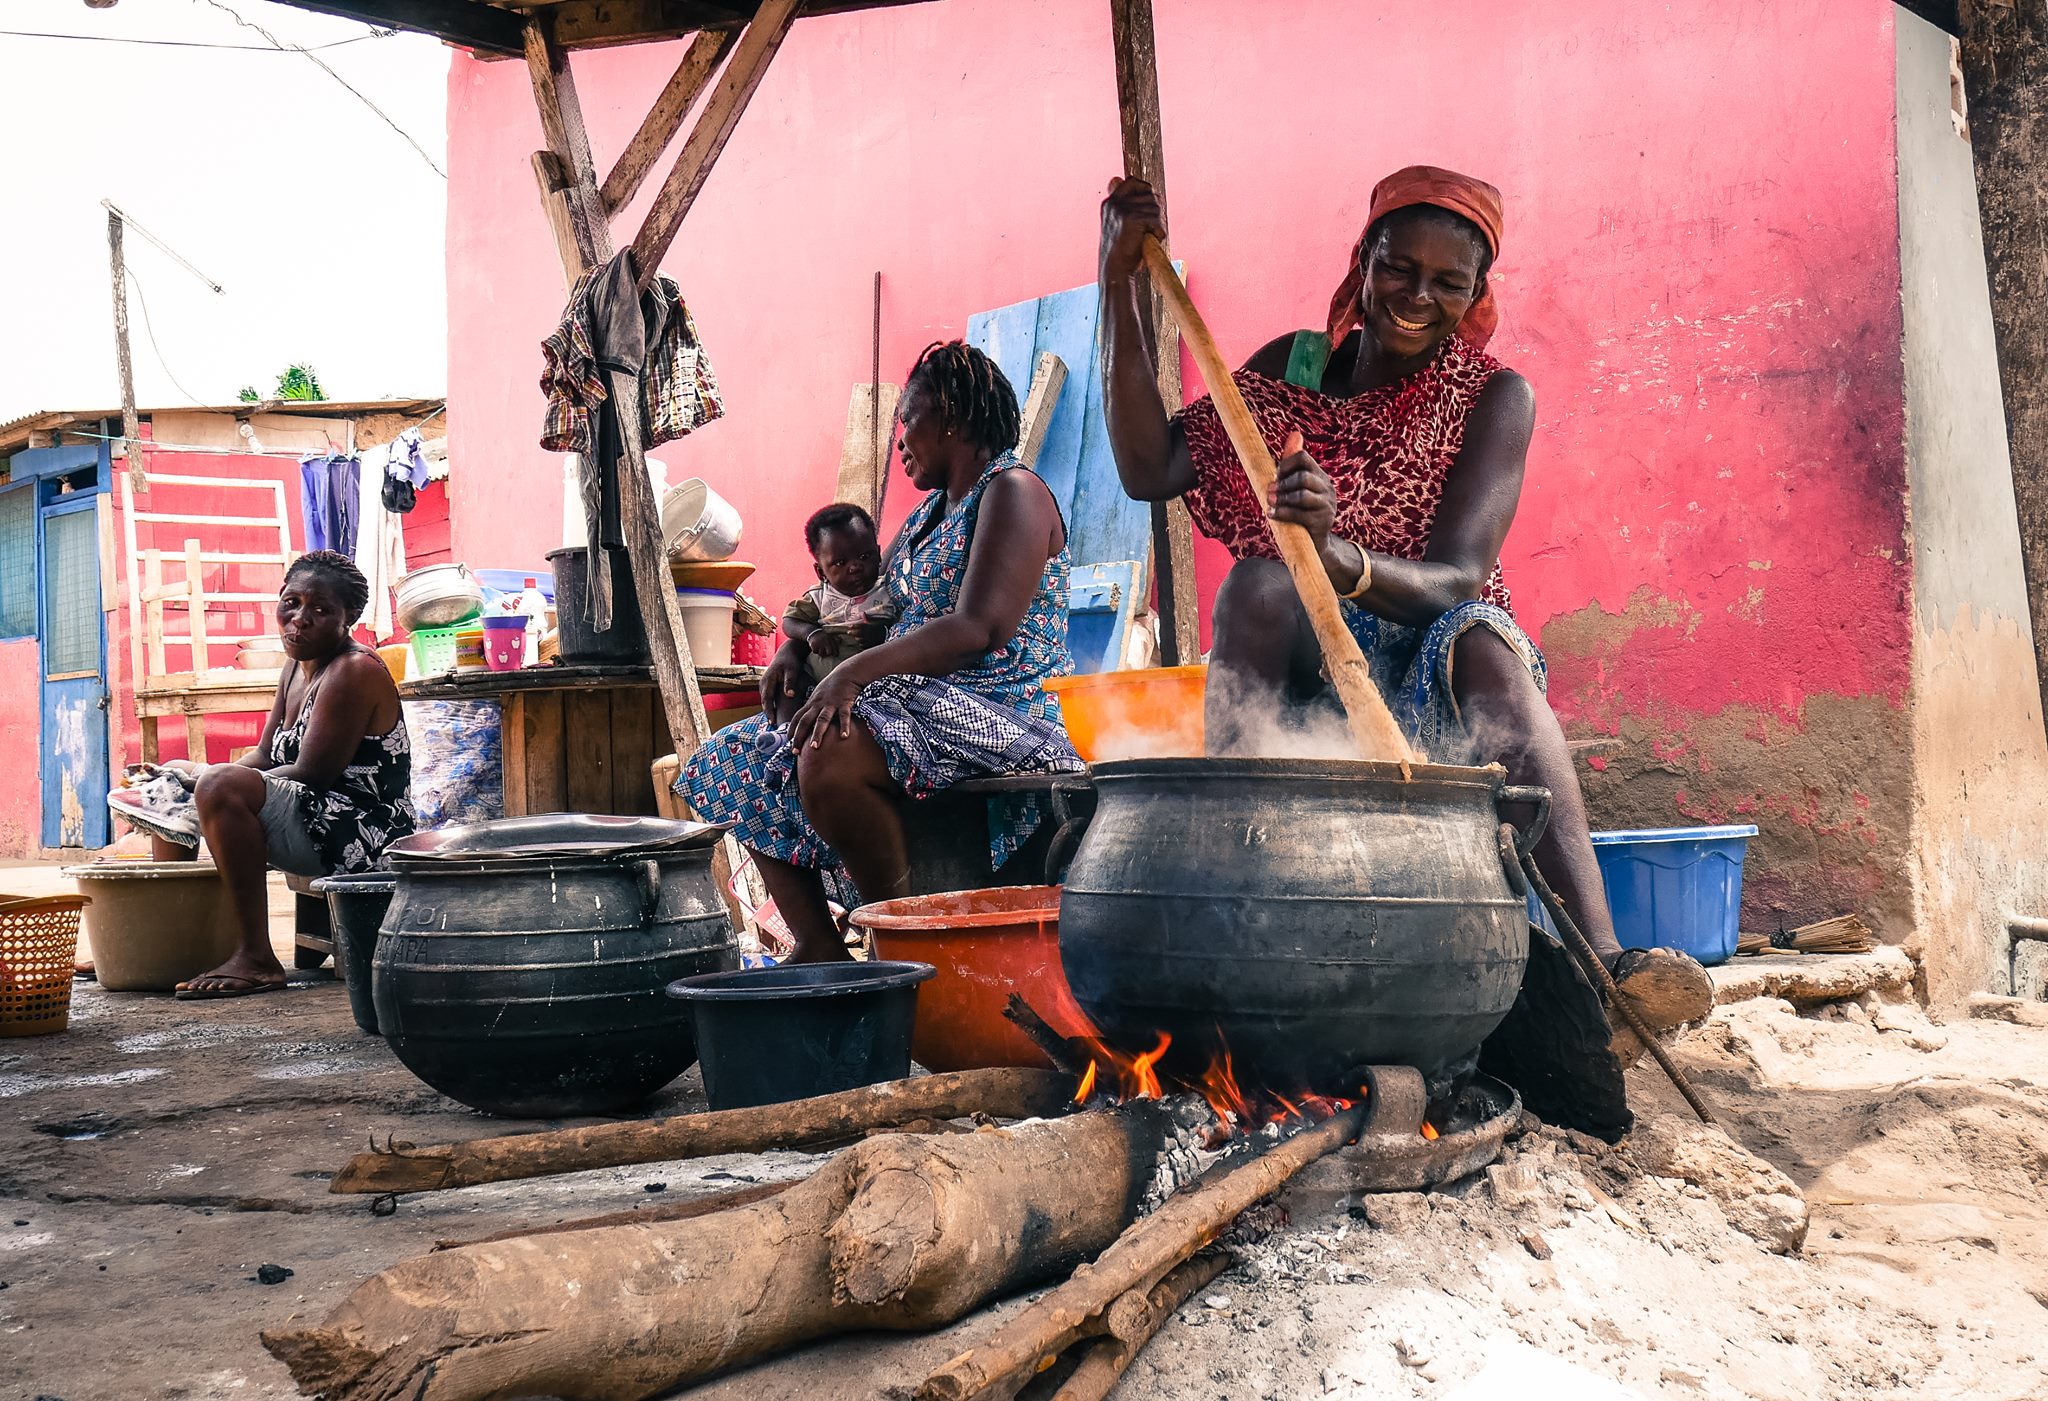 Women cooking and caring for the families